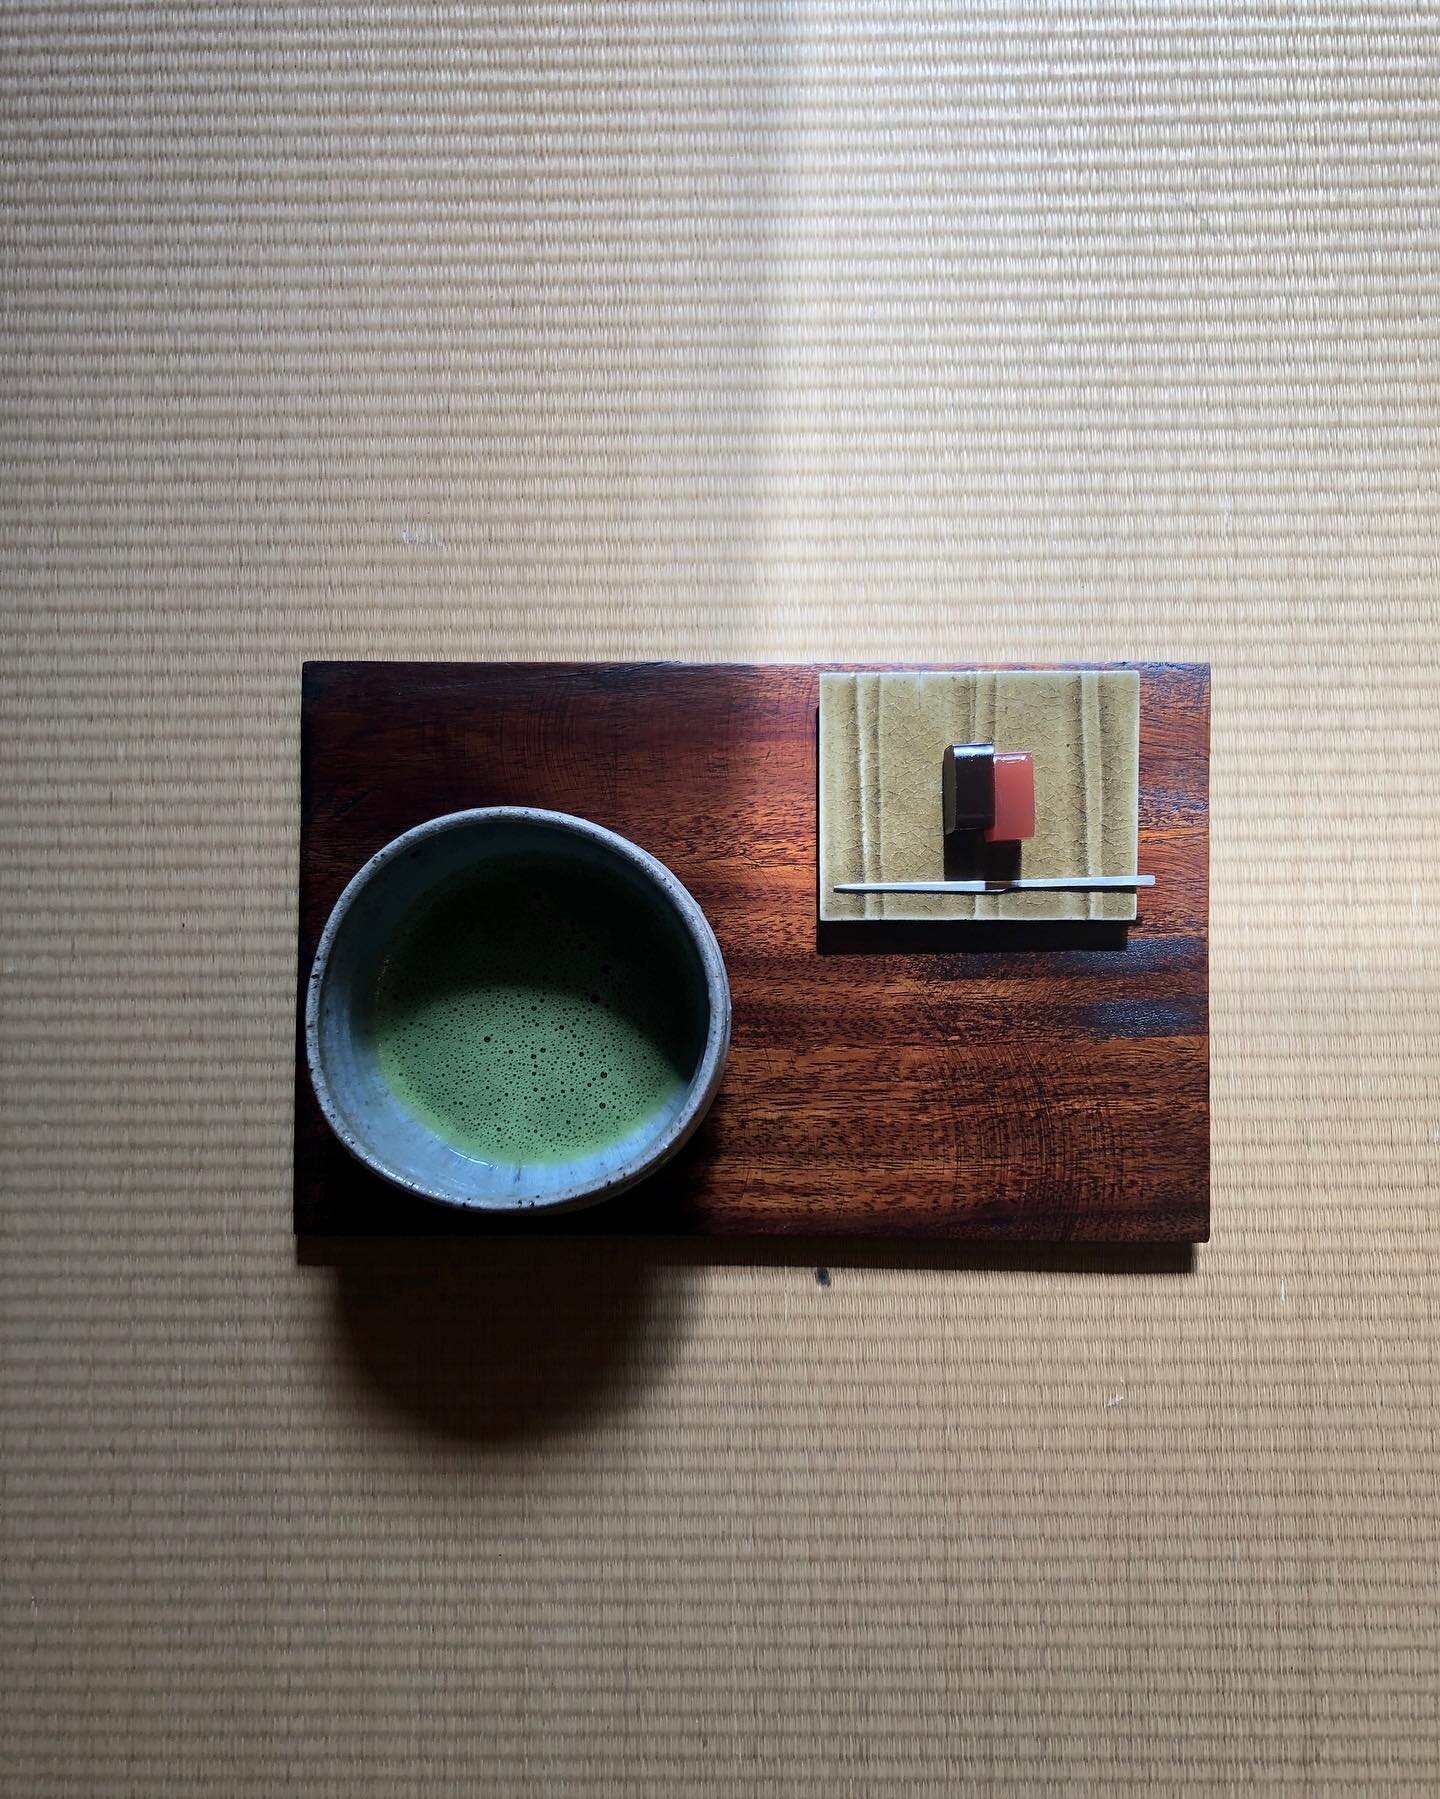 Chawan and small plate for sweets by @mitohgama my master during my apprenticeship in Karatsu. We would often have tea breaks on Fridays as a treat served with fresh Japanese sweets - wagashi. Also as an apprentice I learned to prepare Matcha and swe